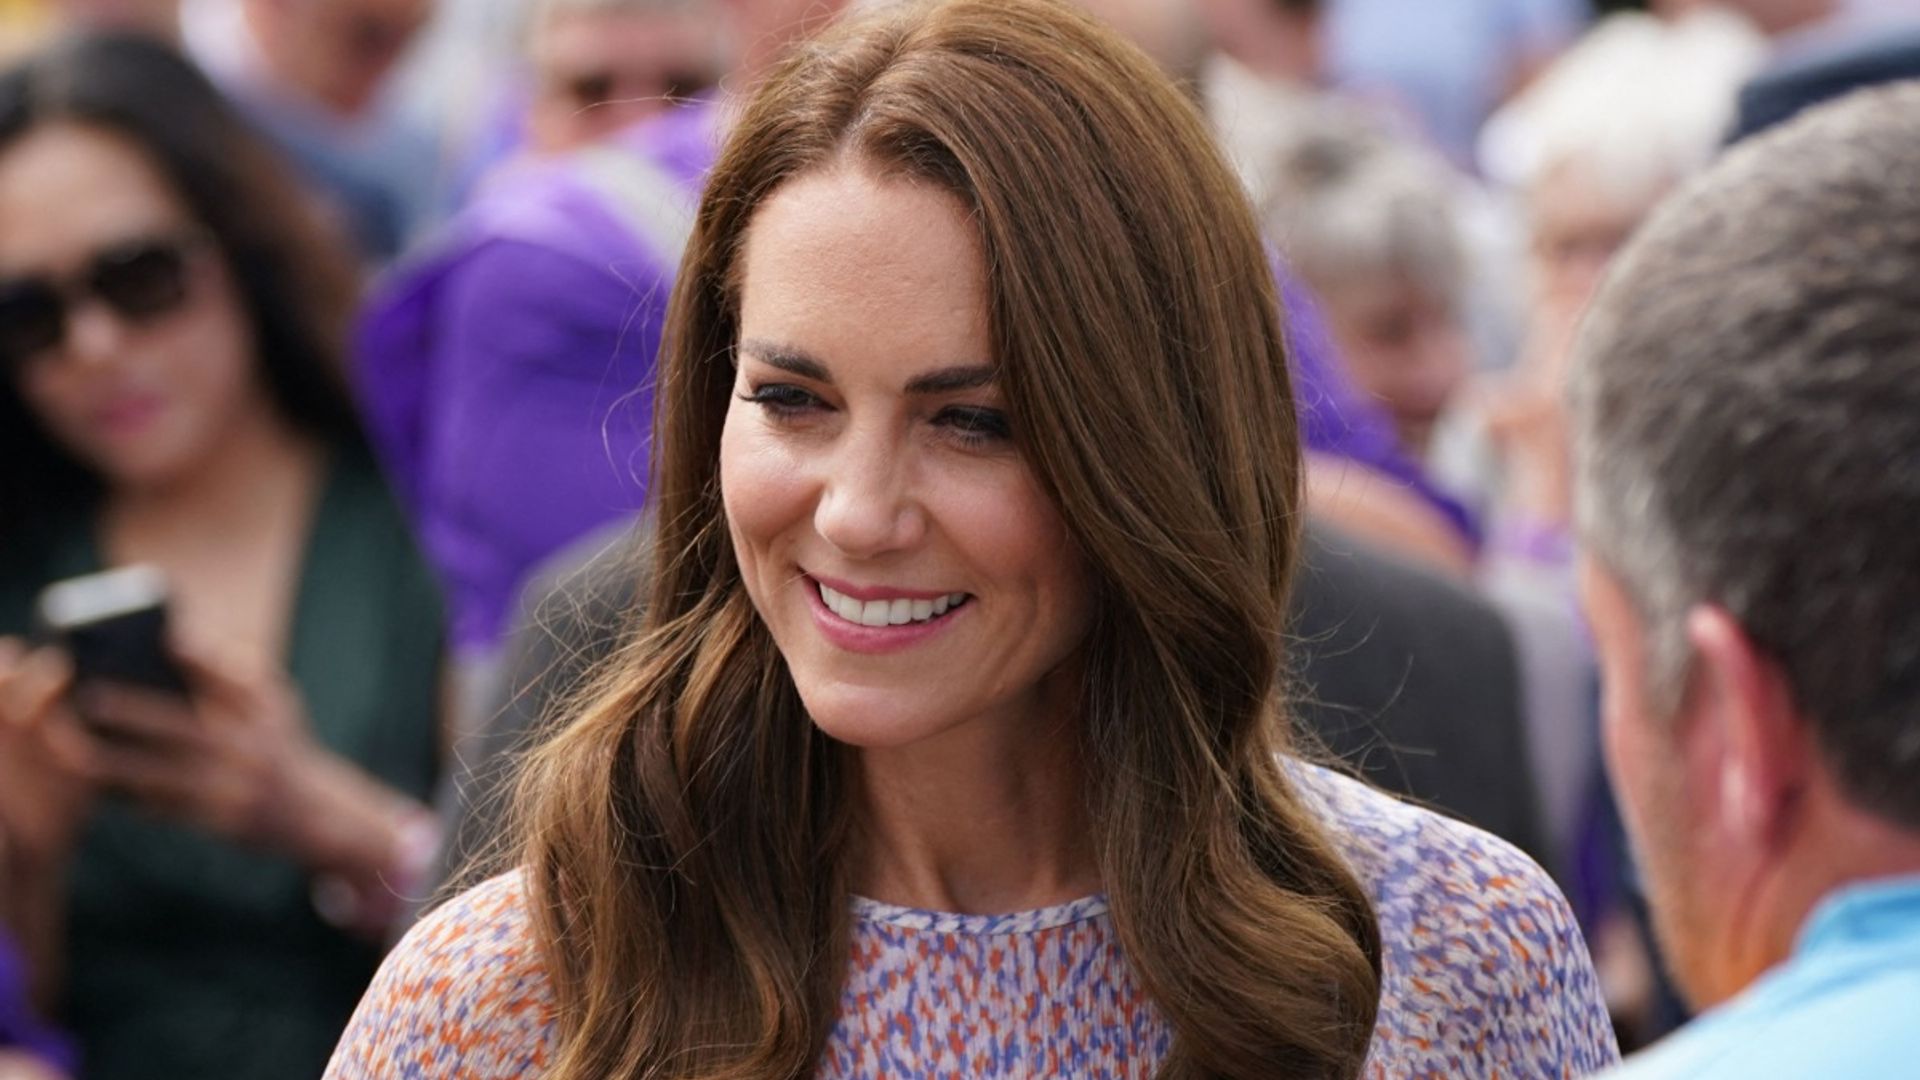 Duchess of Cambridge cradles four-month-old baby at royal event